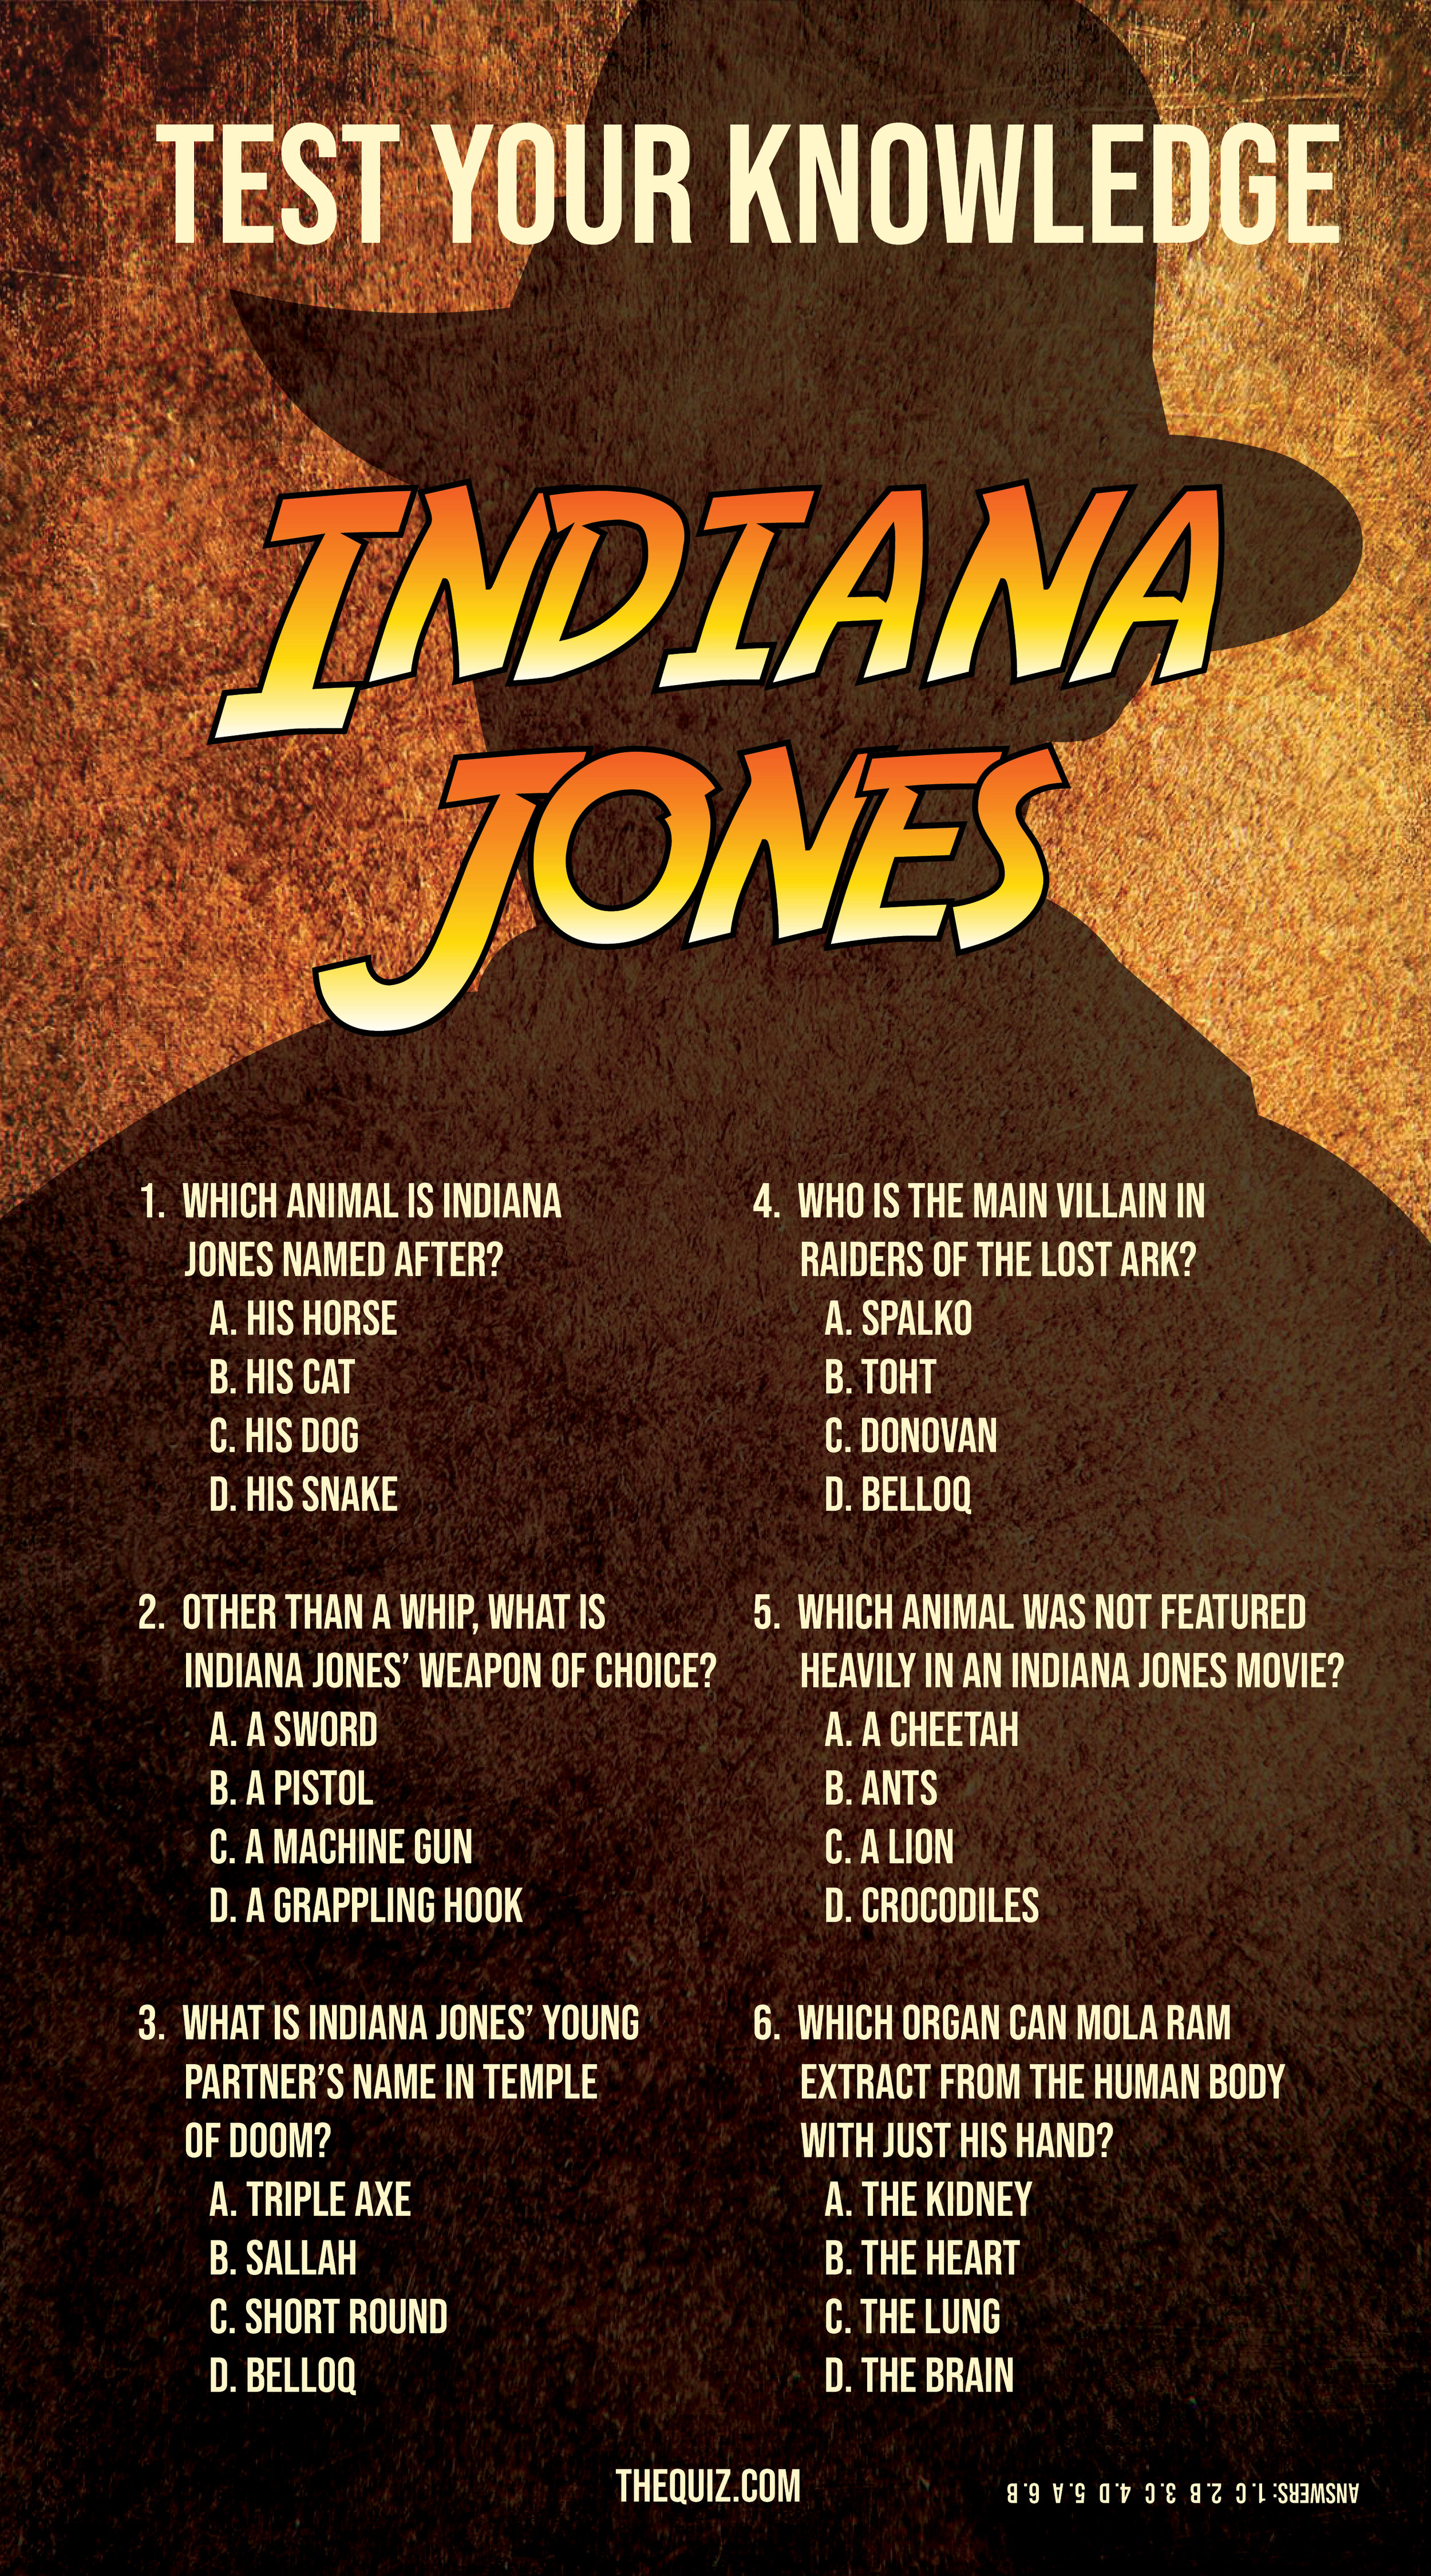 In honor of the fifth Indiana Jones movie being announced, here is a quiz to test your Indiana Jones knowledge.